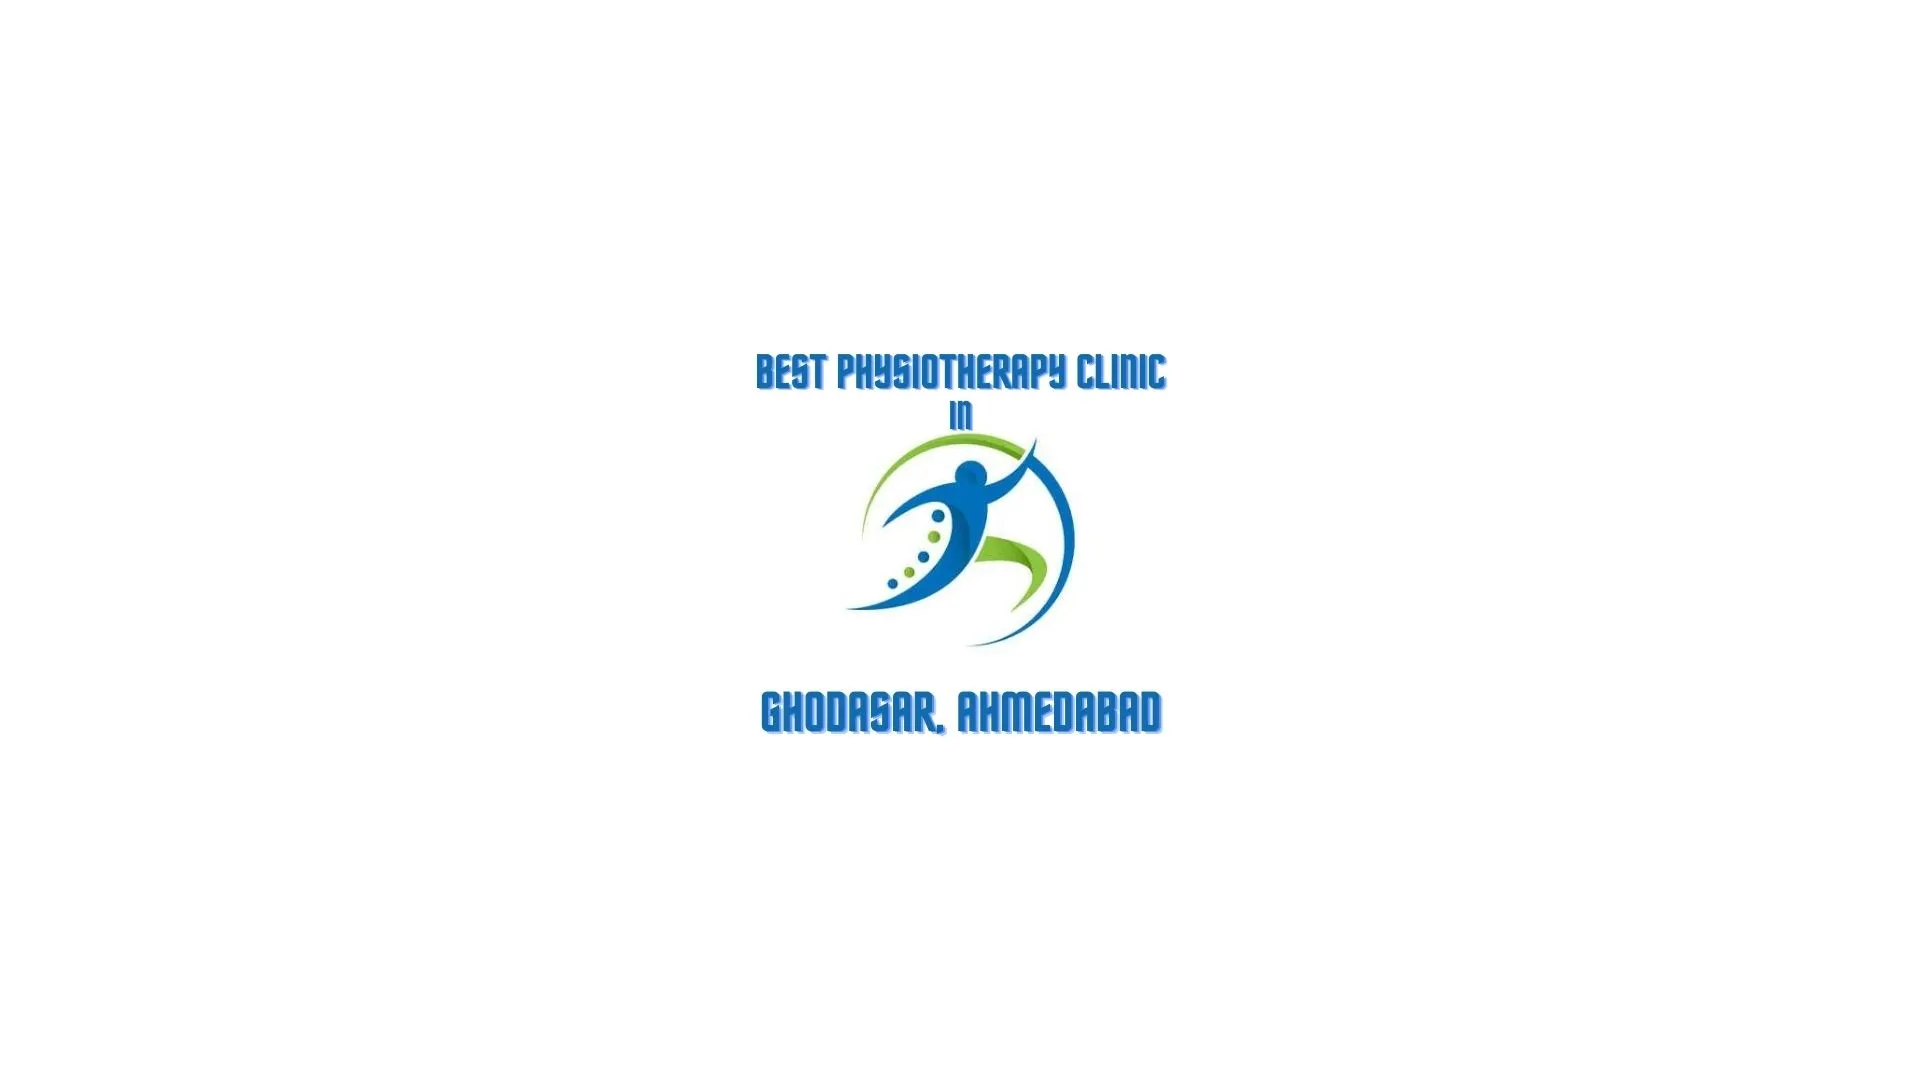 BEST PHYSIOTHERAPY CLINIC IN GHODASAR